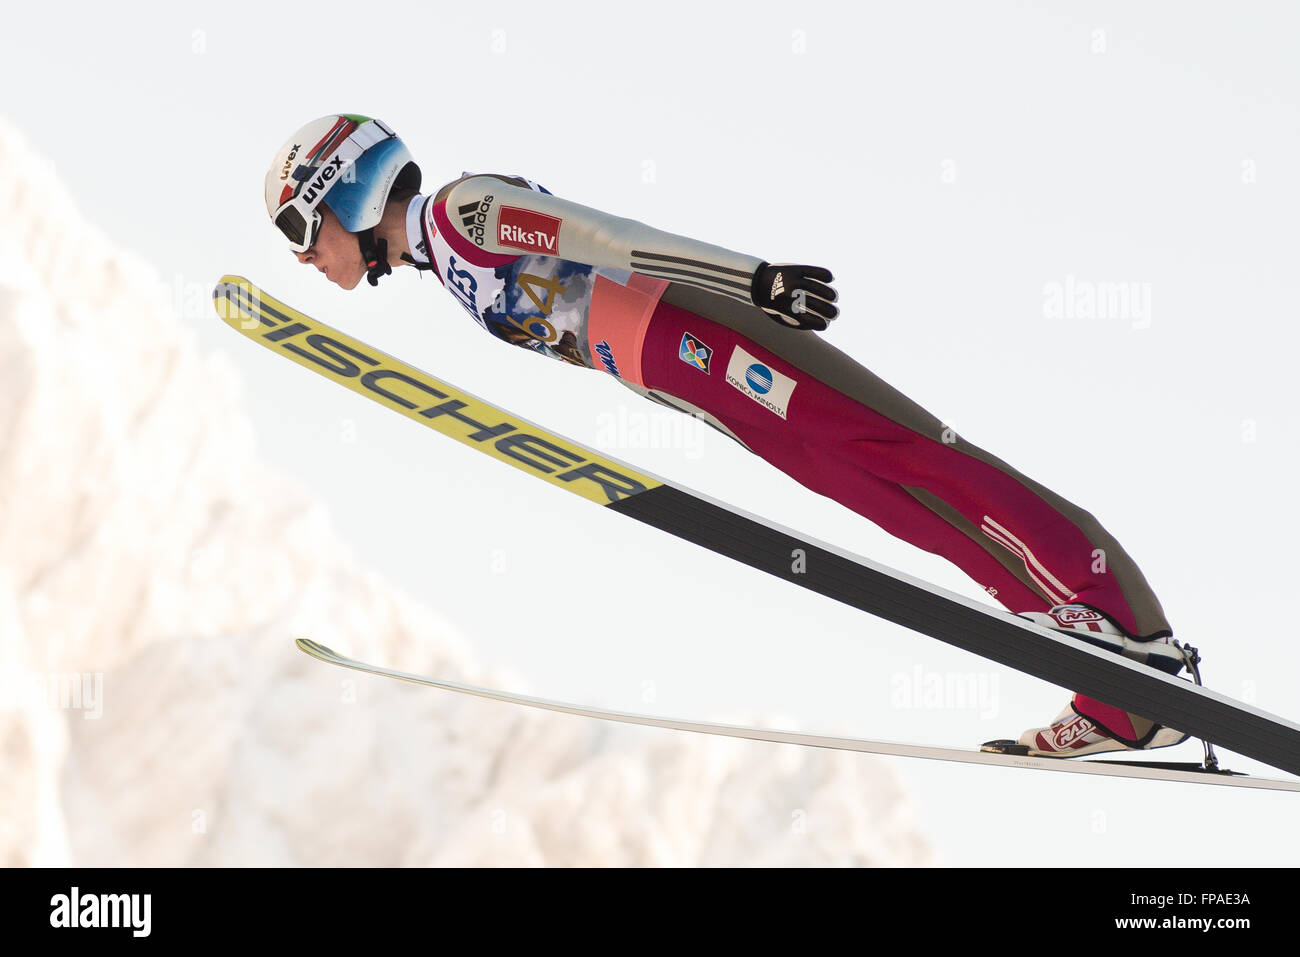 Planica, Slovenia. 18th Mar, 2016. Johann Andre Forfang of Norway competes during Planica FIS Ski Jumping World Cup final on the March 18, 2016 in Planica, Slovenia. © Rok Rakun/Pacific Press/Alamy Live News Stock Photo